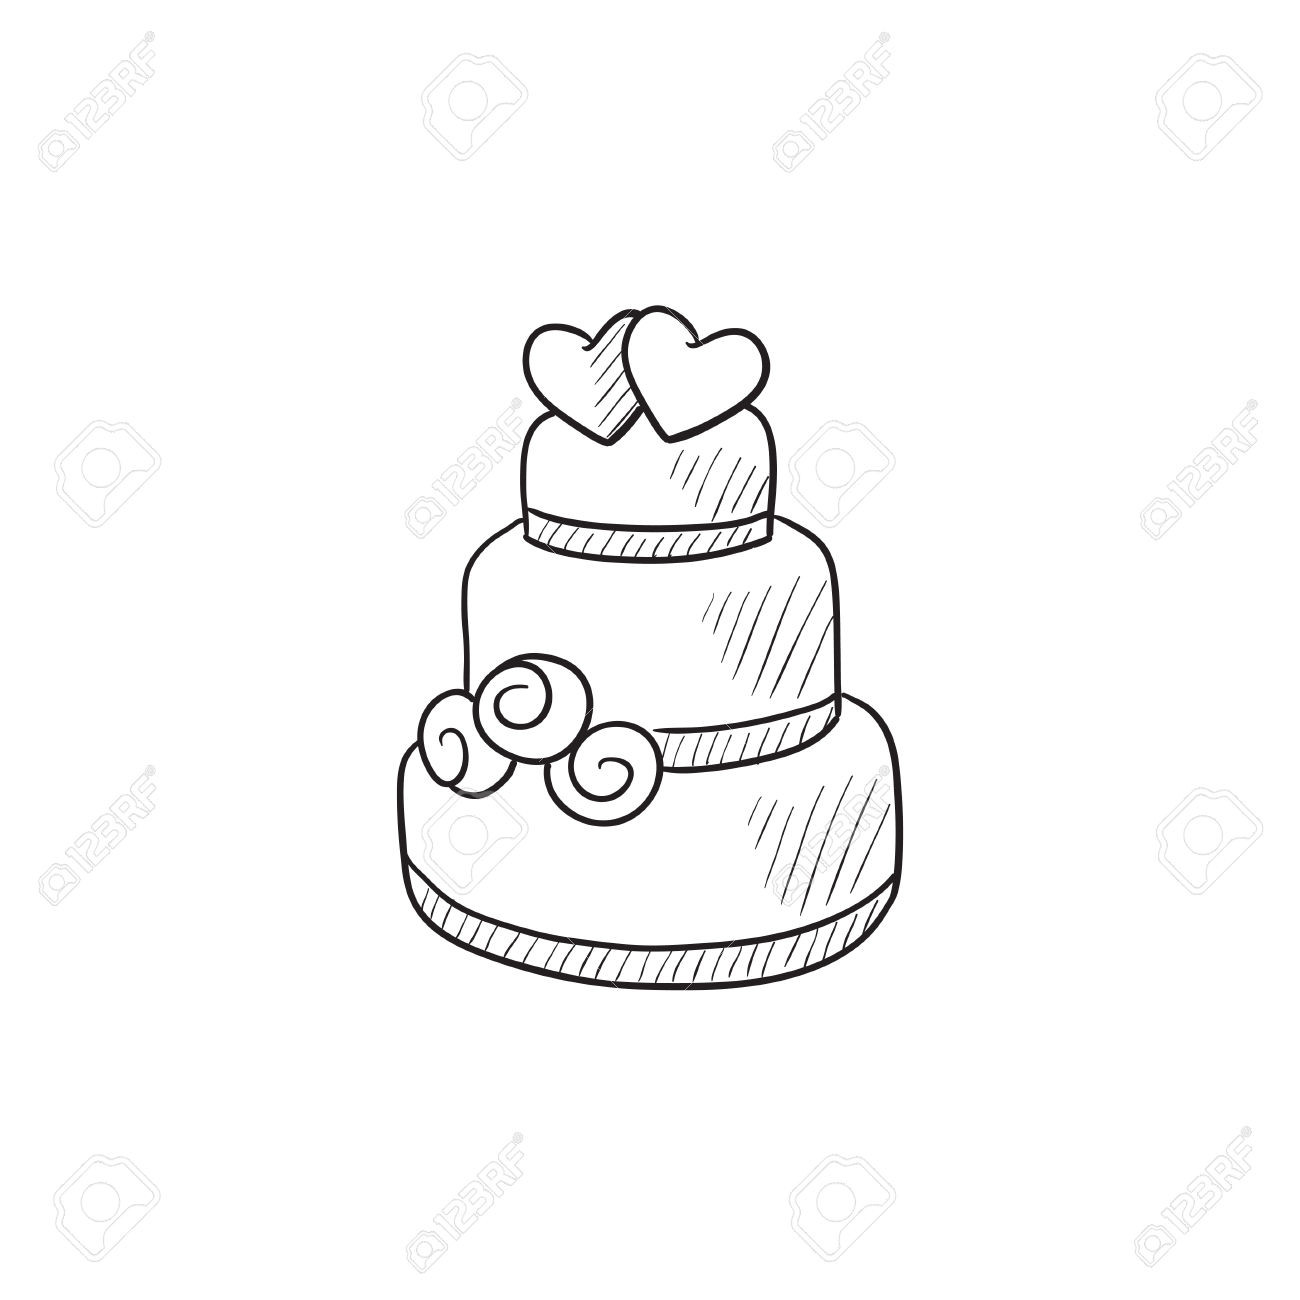 Wedding Cakes Drawings
 Drawn wedding cake black and white Pencil and in color